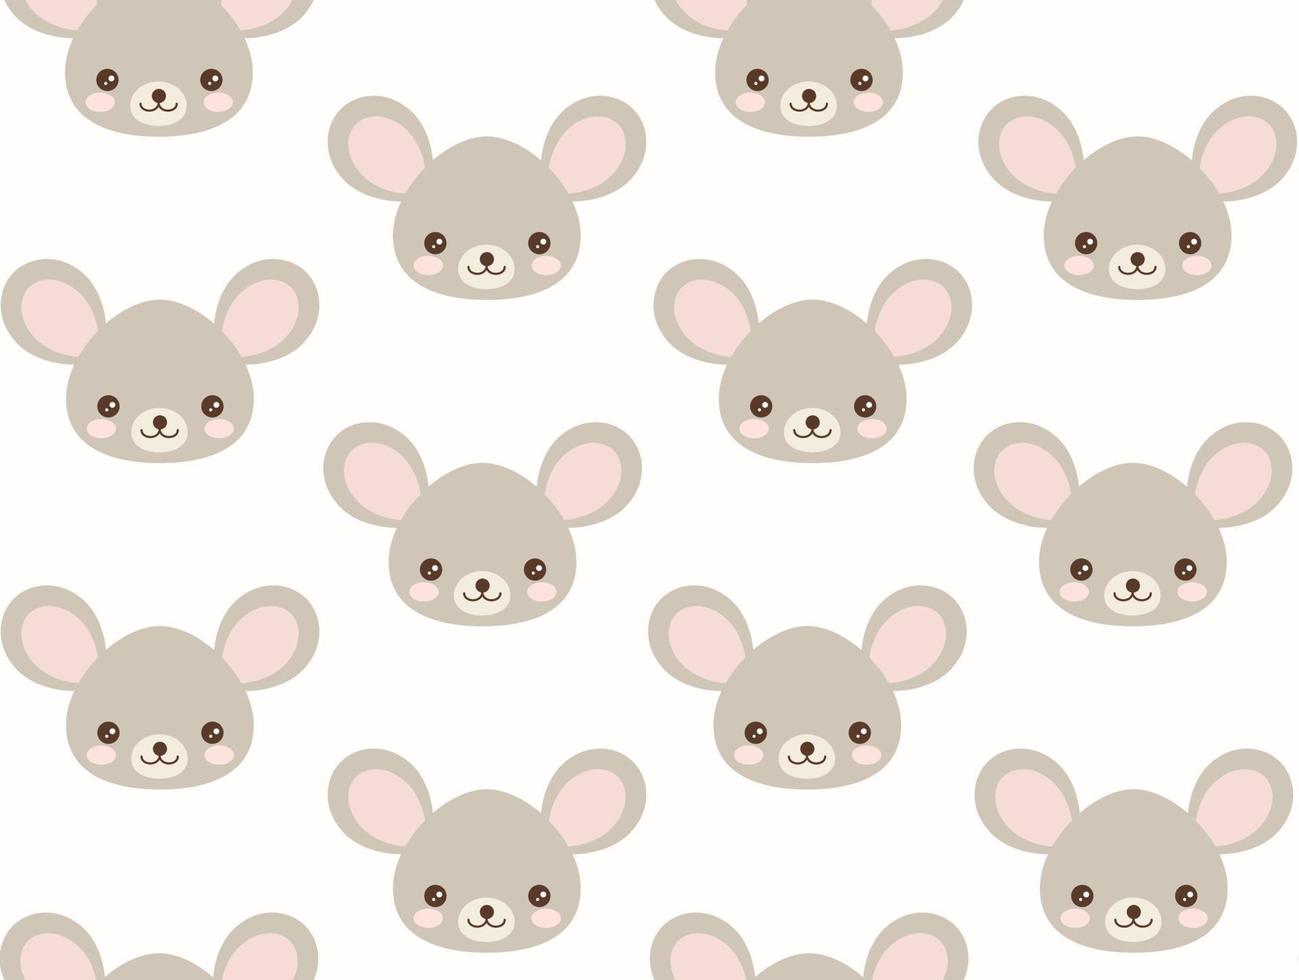 Cute mouse vector pattern. Mouse head in kawaii style. Seamless background.